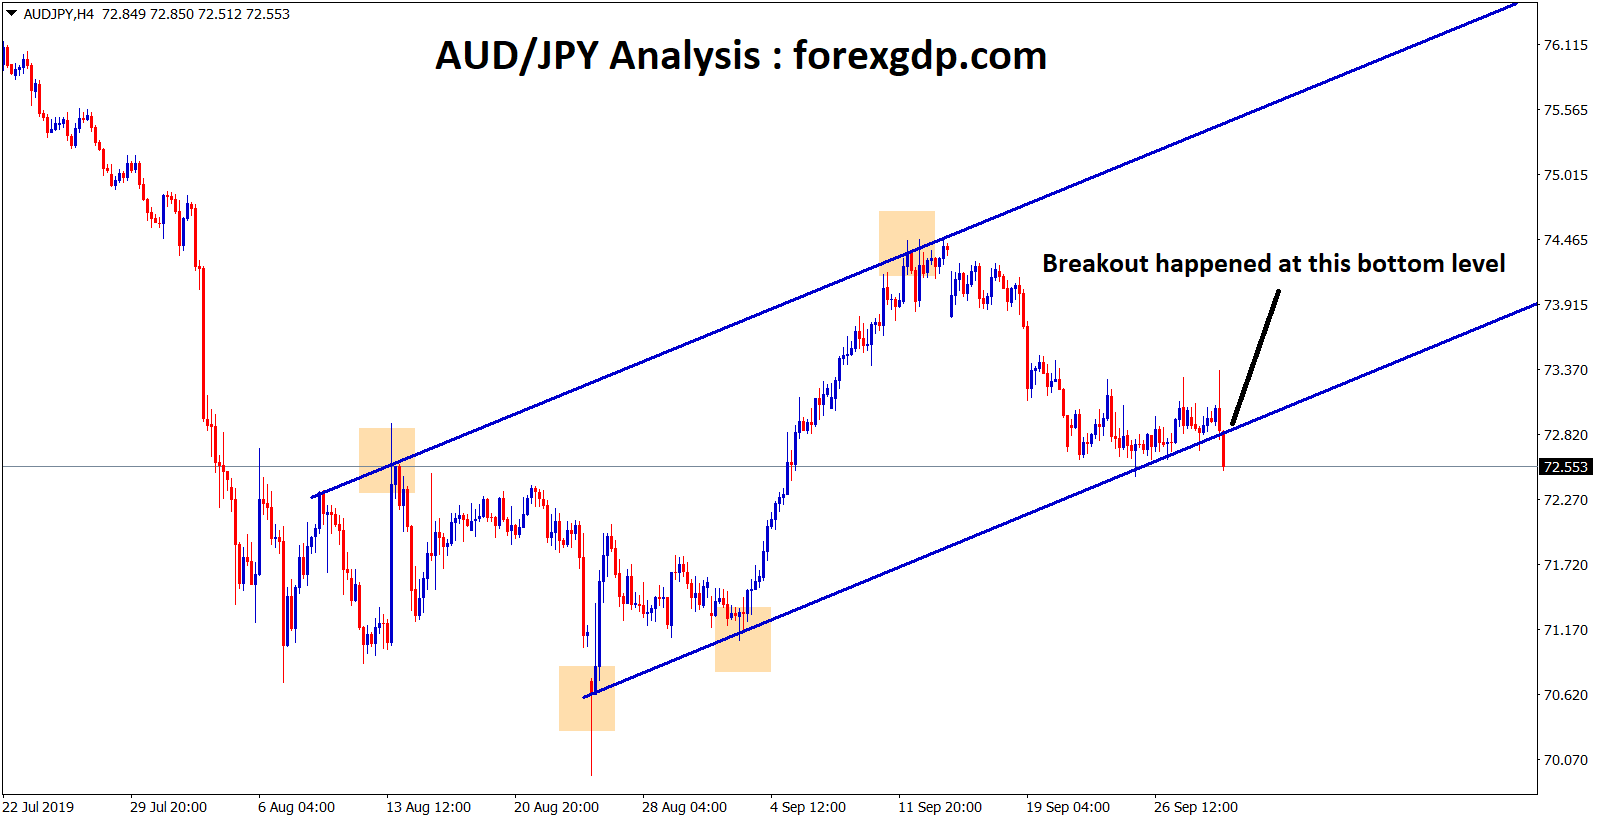 In an aud jpy uptrend channel breakout happened at the bottom